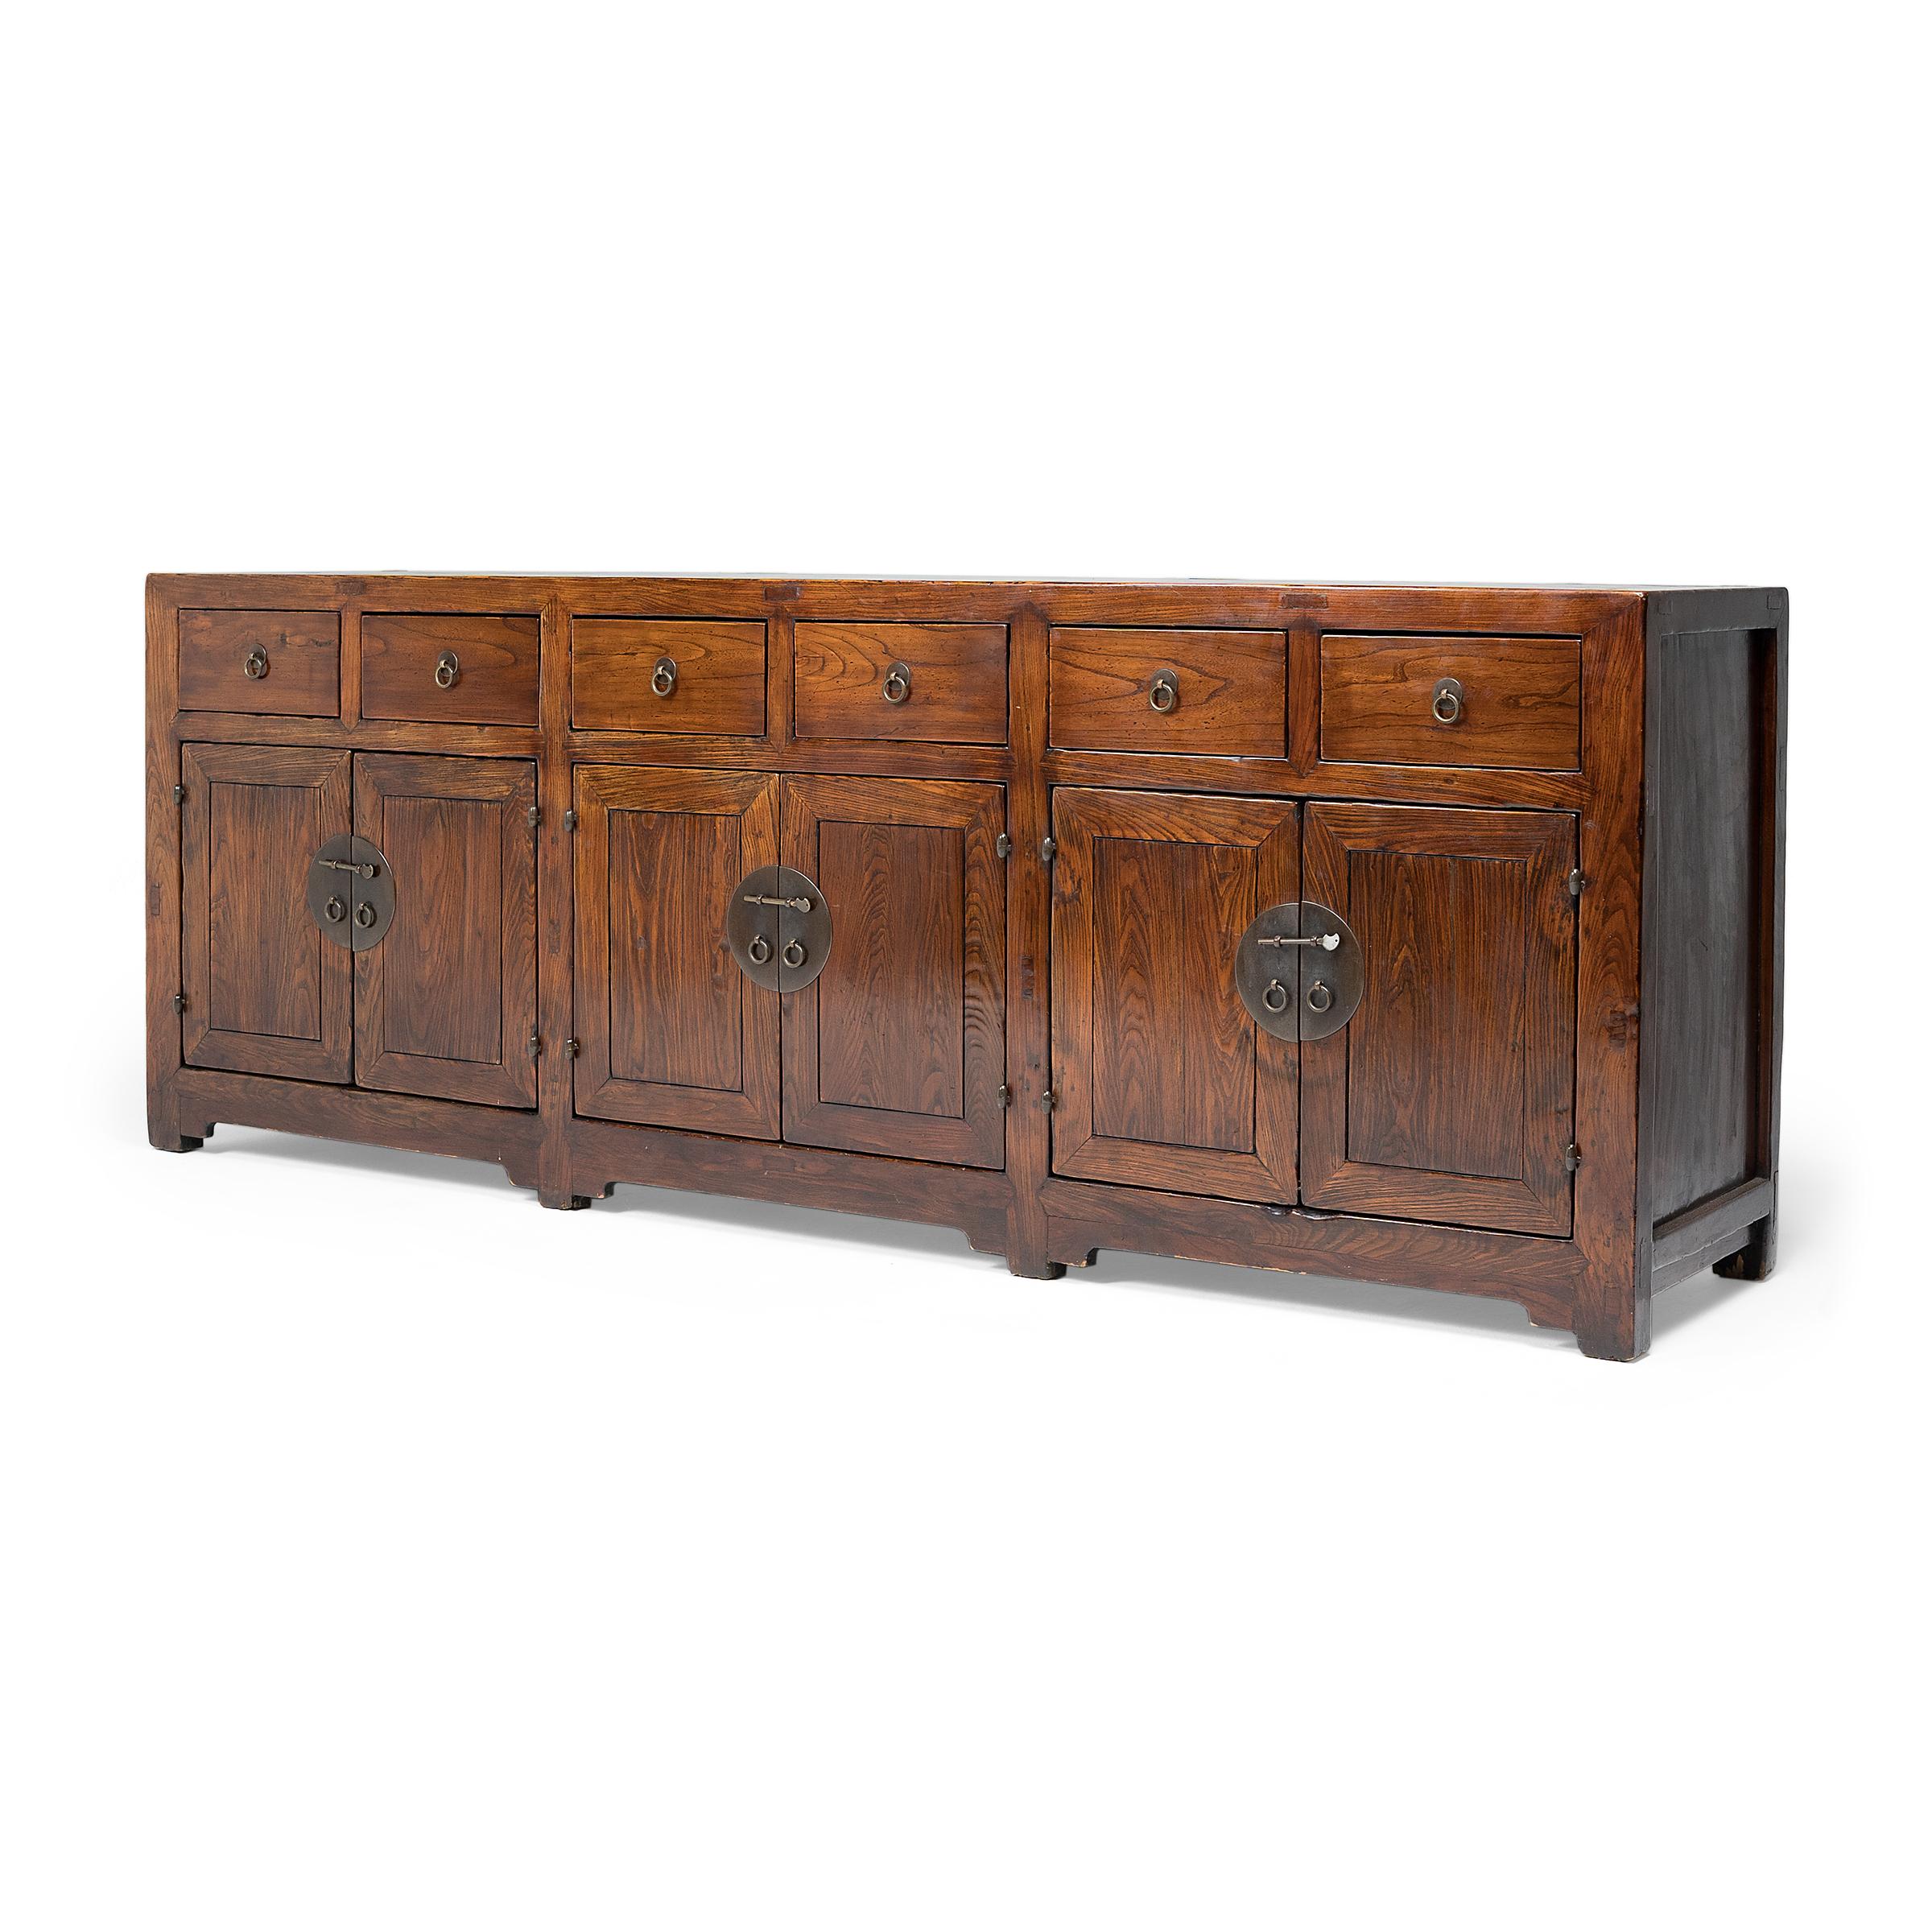 This provincial coffer from northern China has a simple, clean-lined form. The coffer dates to the early 19th century and is expertly crafted of walnut using traditional mortise-and-tenon joinery methods. The square-corner cabinet features six